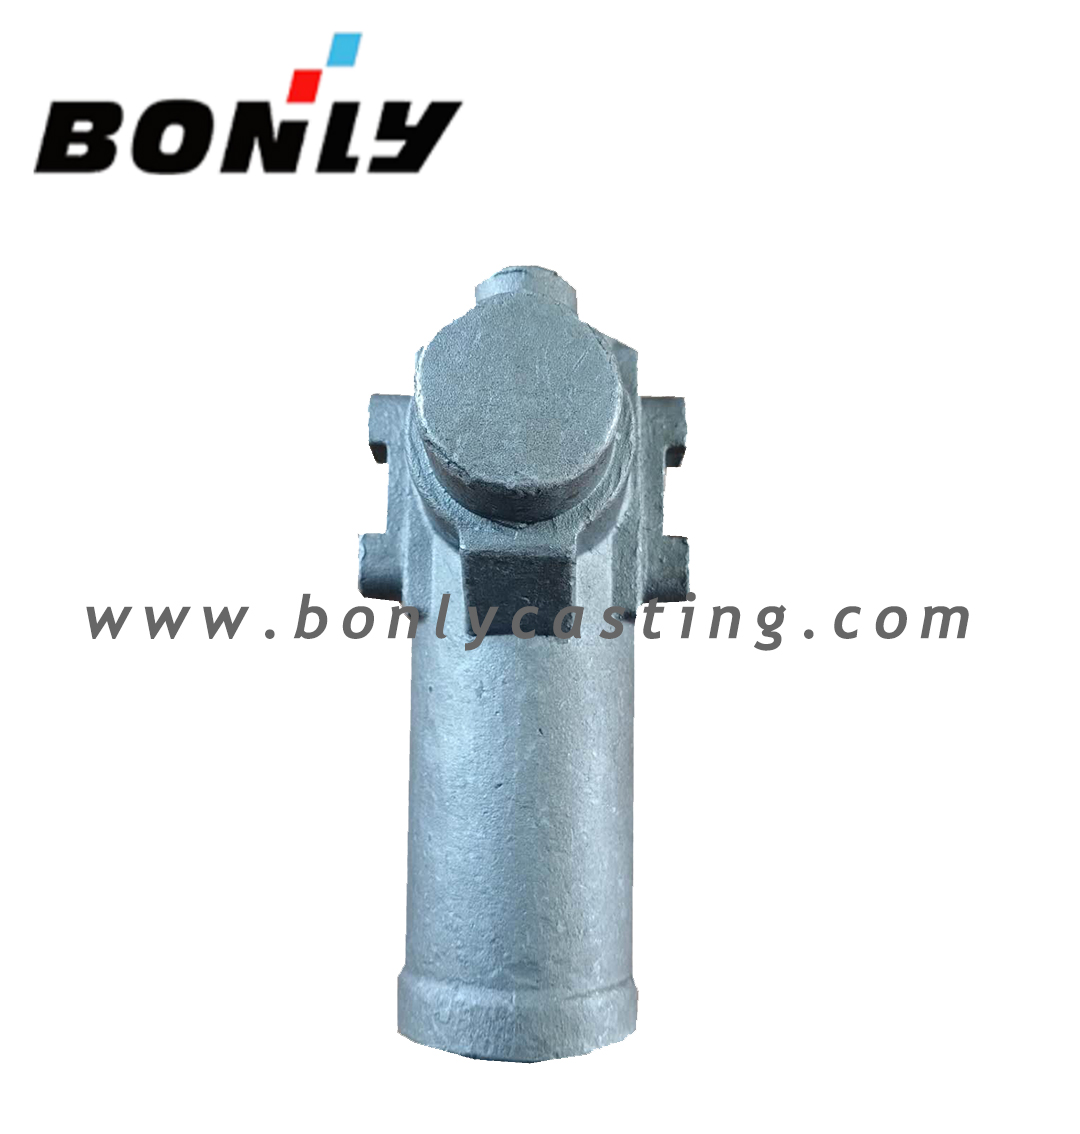 China Factory for Electric Water Control Valve - Anti-Wear Cast Iron sand coated casting Anti Wear Mechanical parts – Fuyang Bonly